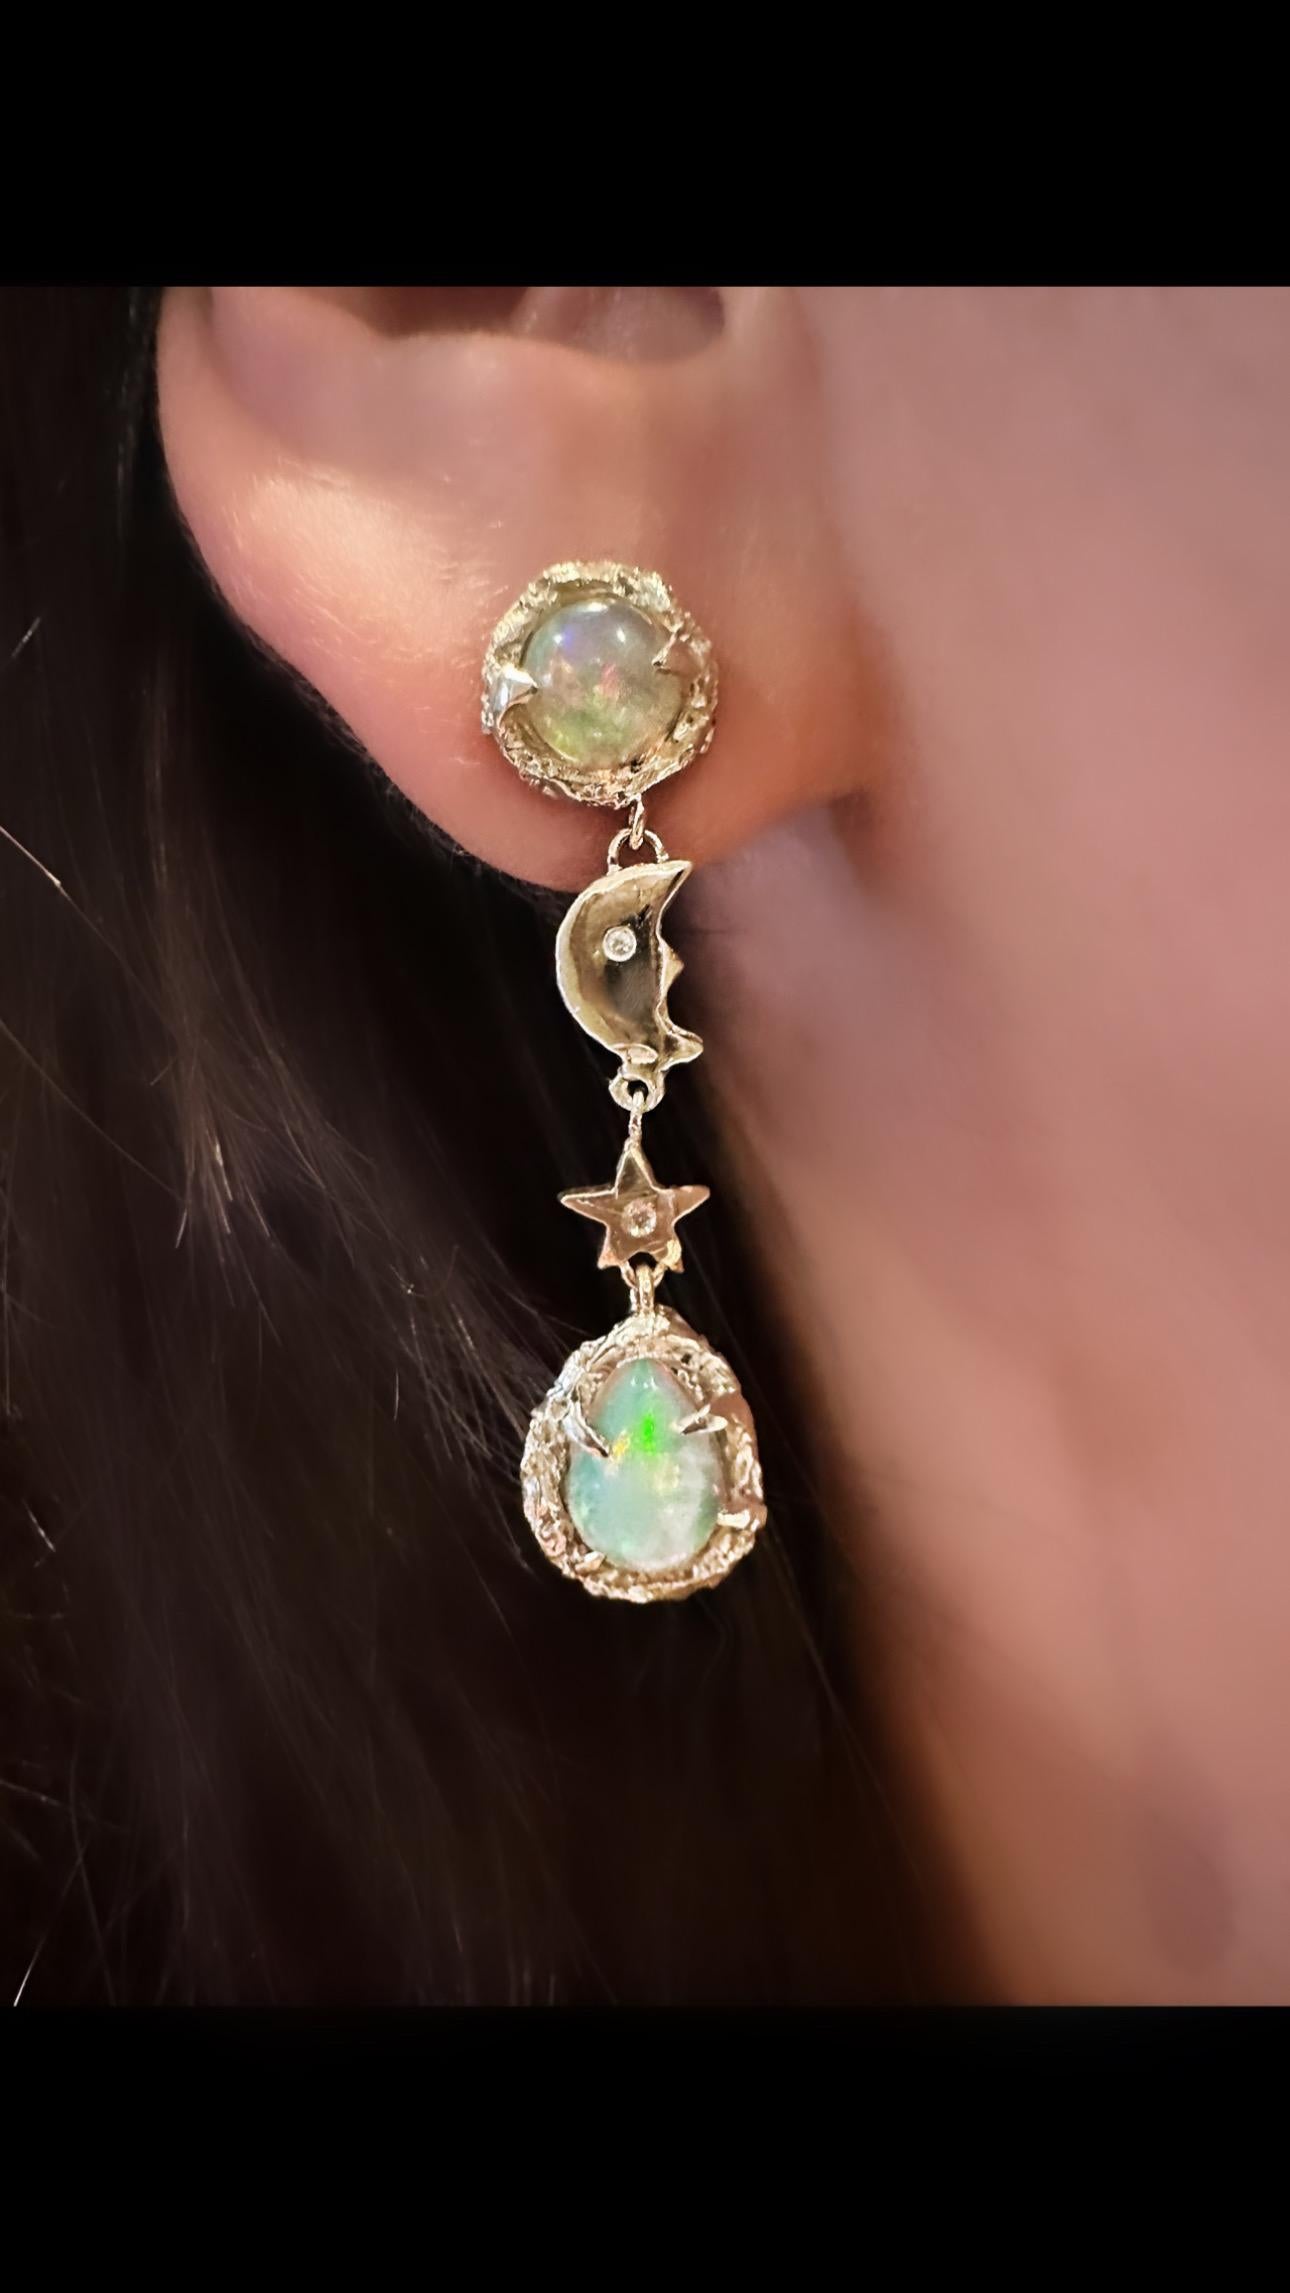 Bring the beauty of the galaxy to your ears with these one-of-a-kind 14k yellow gold iris moon and stars opal with diamond earrings! 🌙✨ The opals in these earrings have a stunning galaxy-like fire that will leave you mesmerized. Plus, the diamond